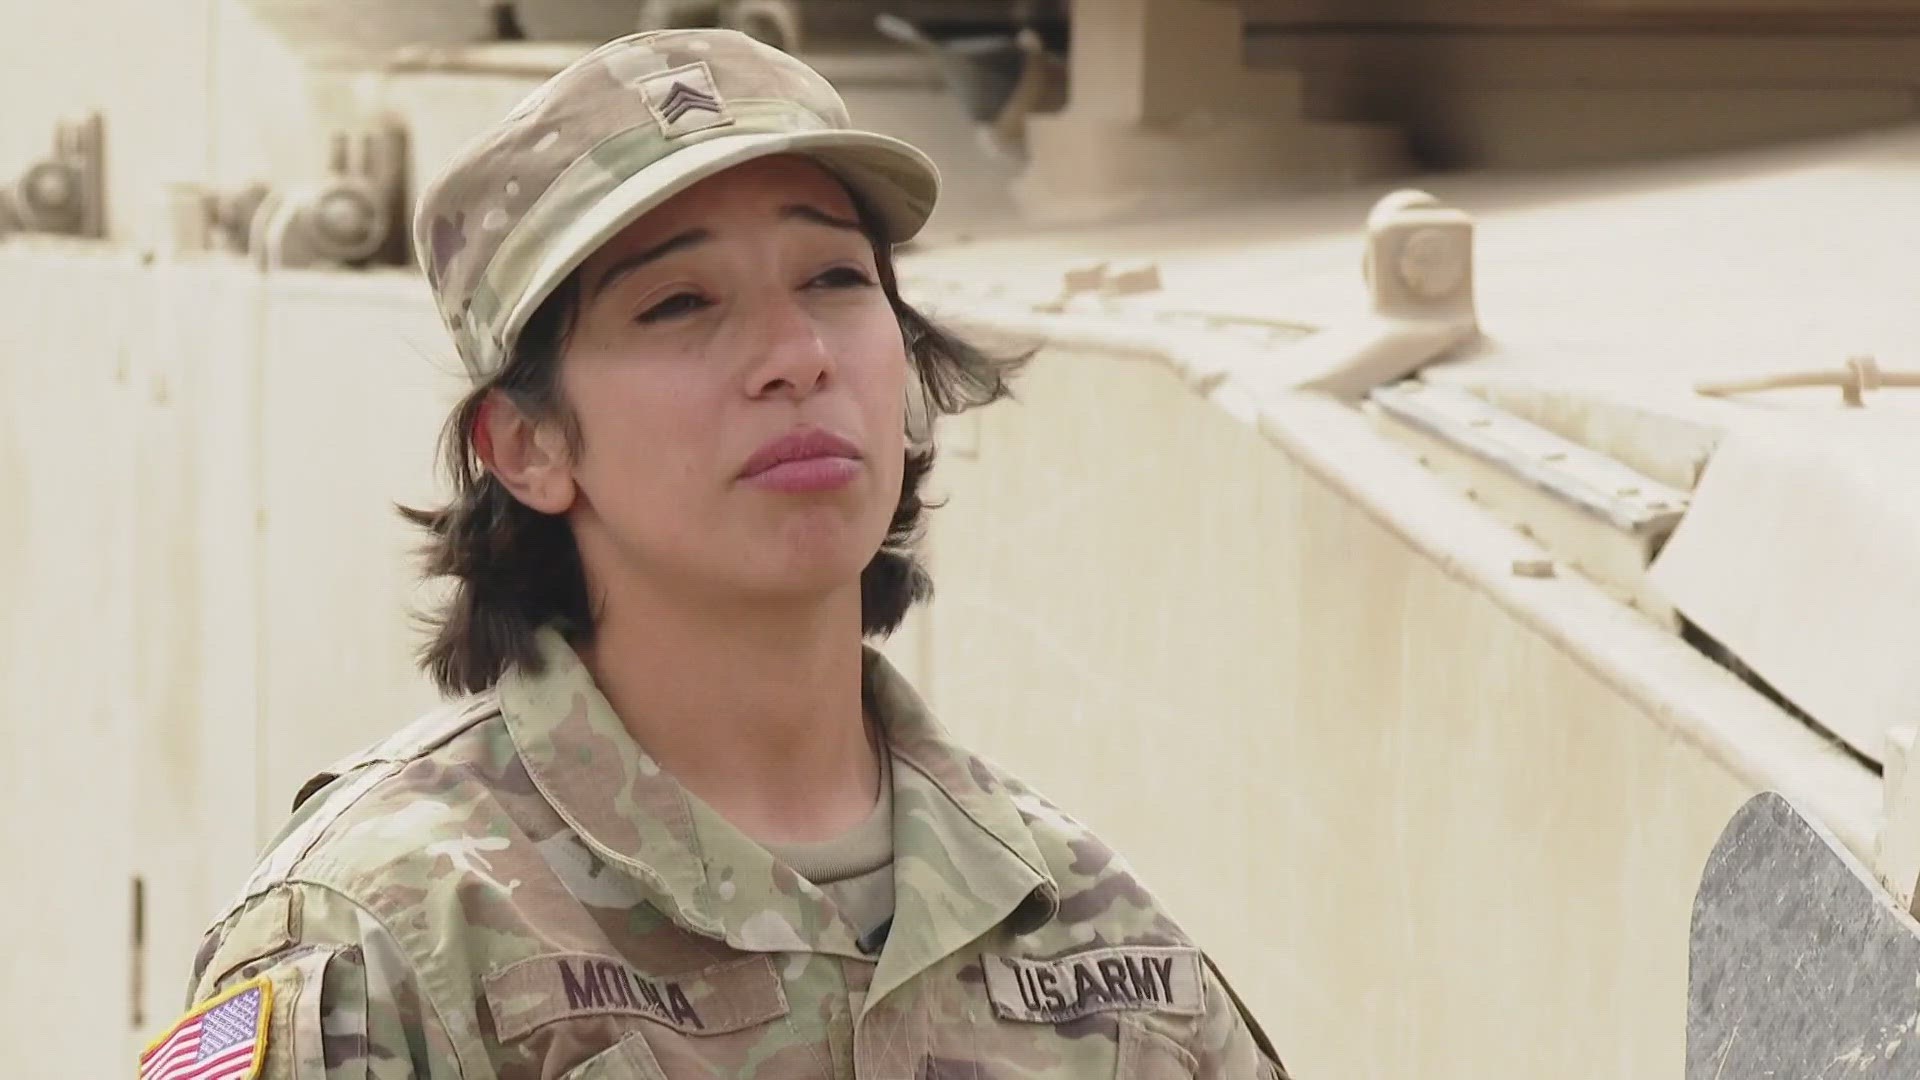 Molina was born and raised in Iraq, sparking her interest in wanting to join the armed forces to help out.